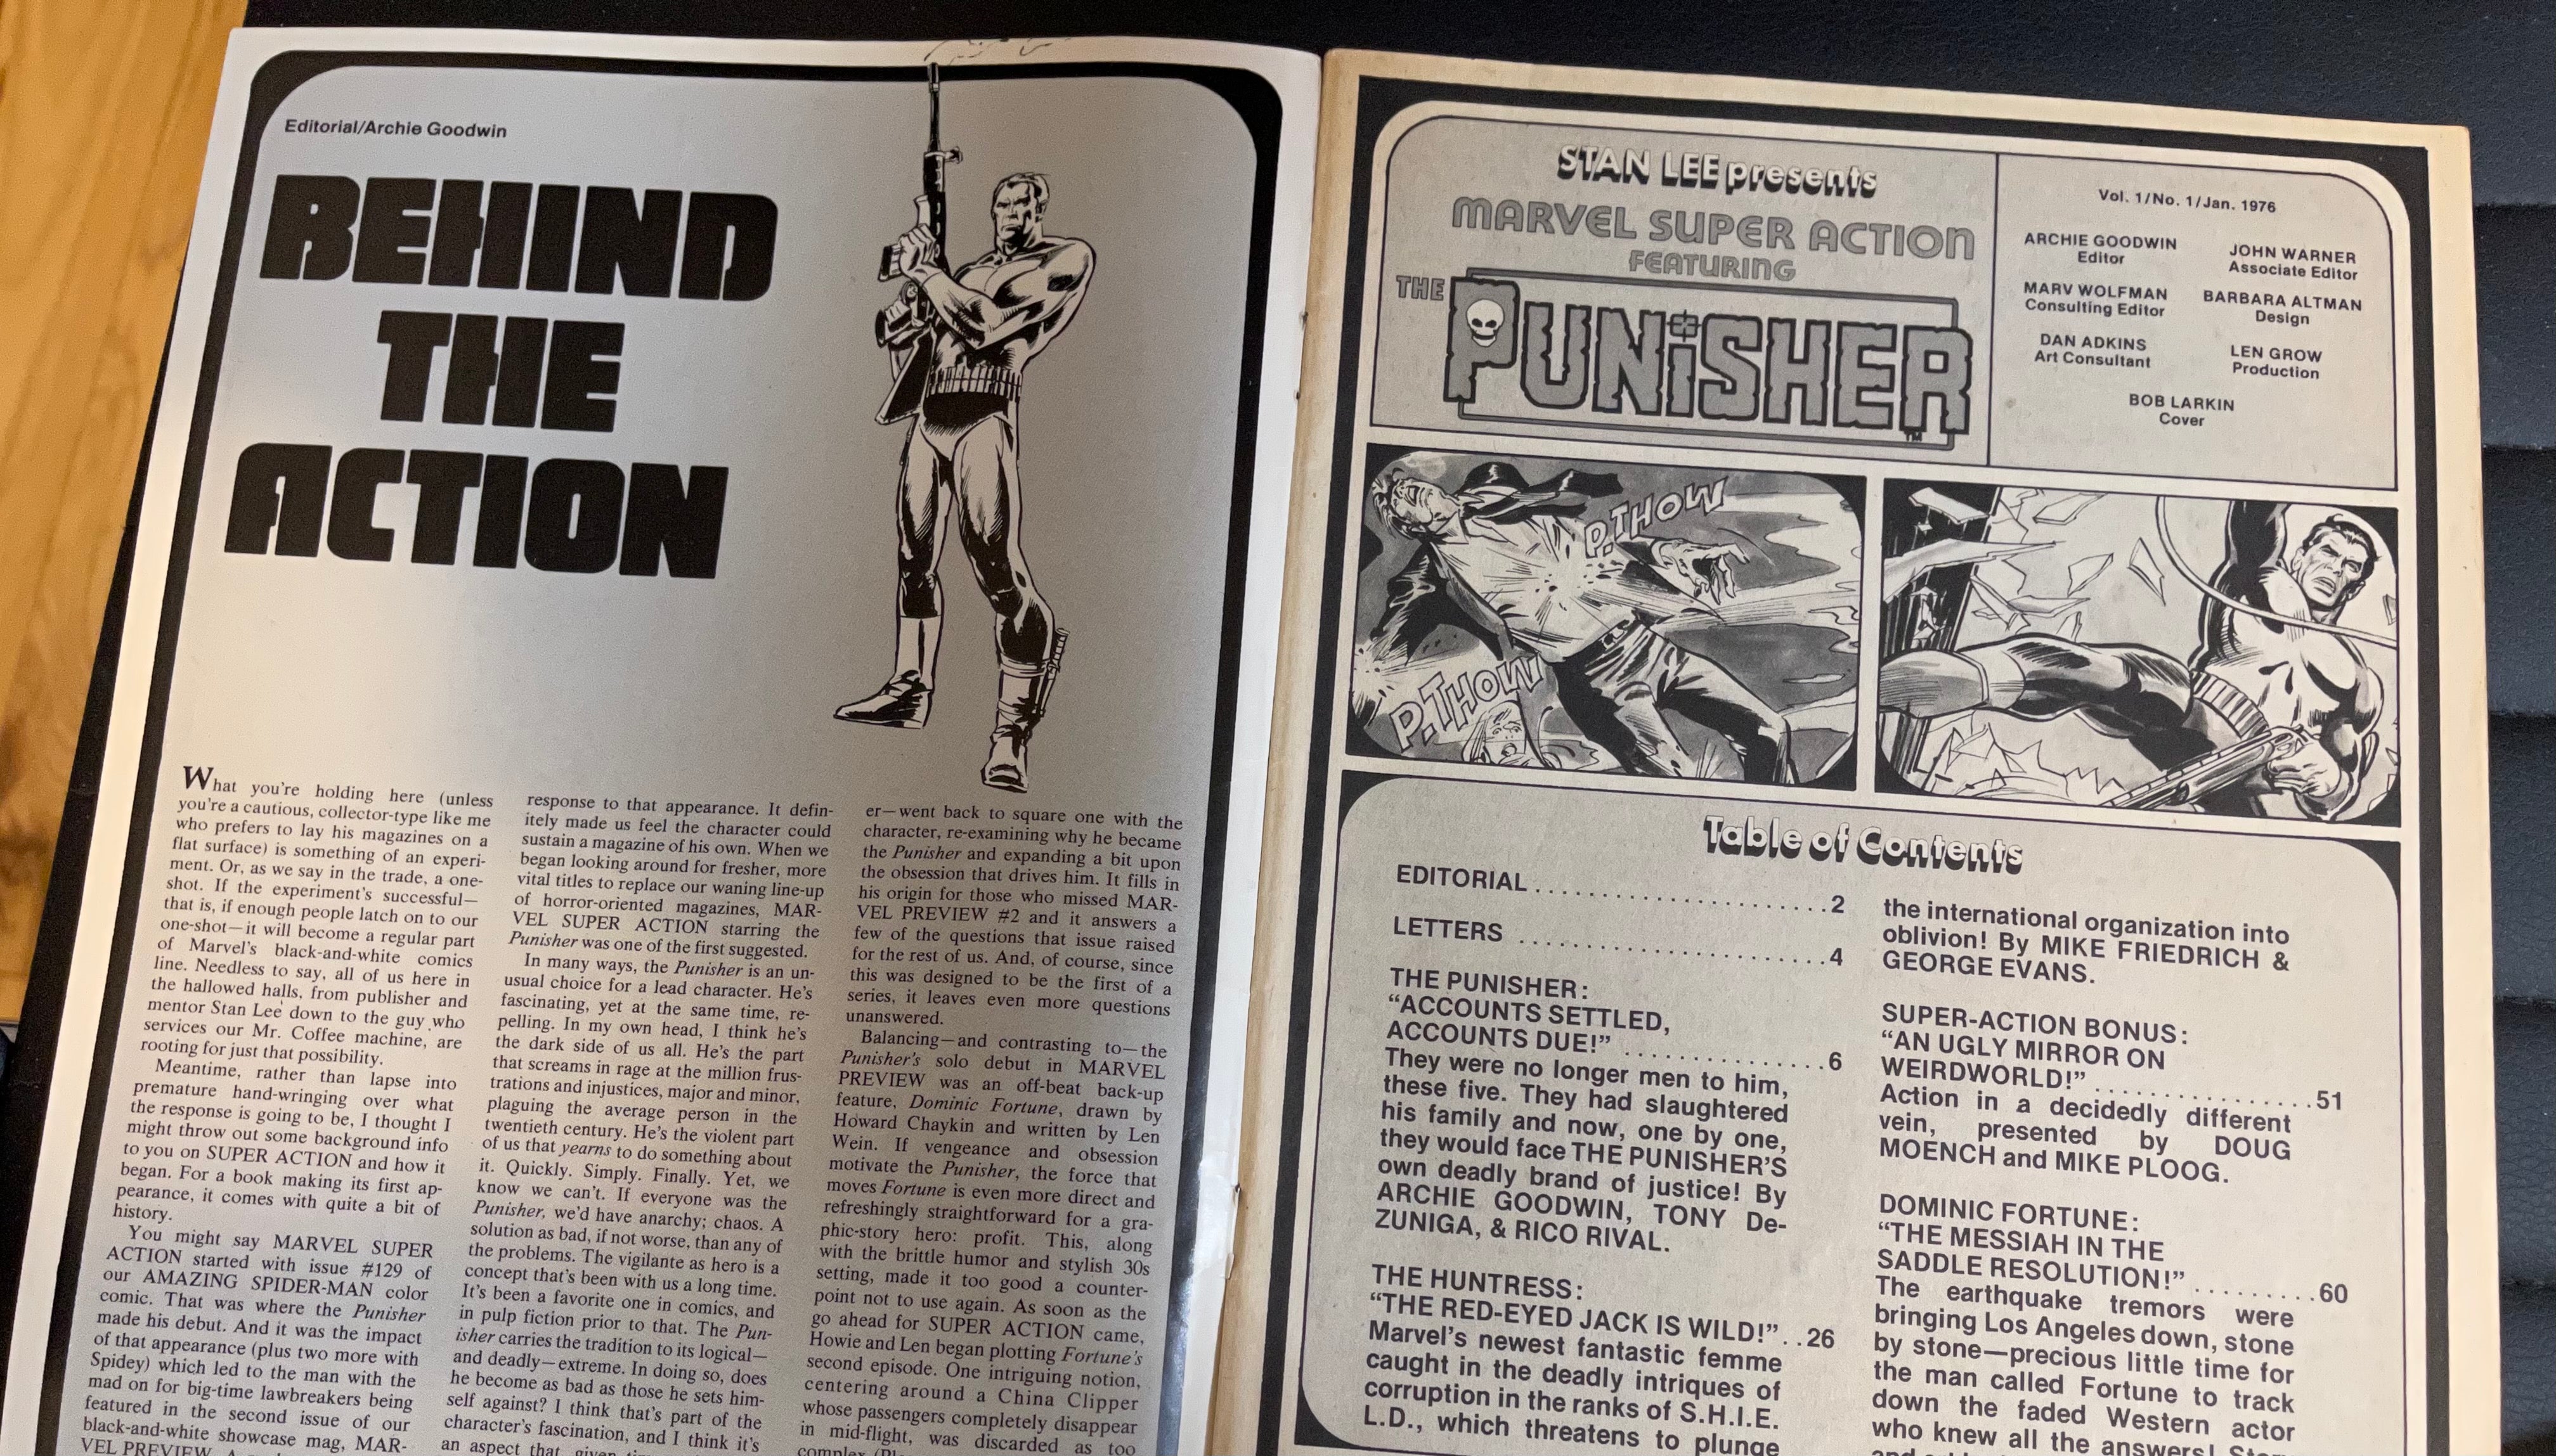 Marvel Super Action Featuring the Punisher comic magazine 1976